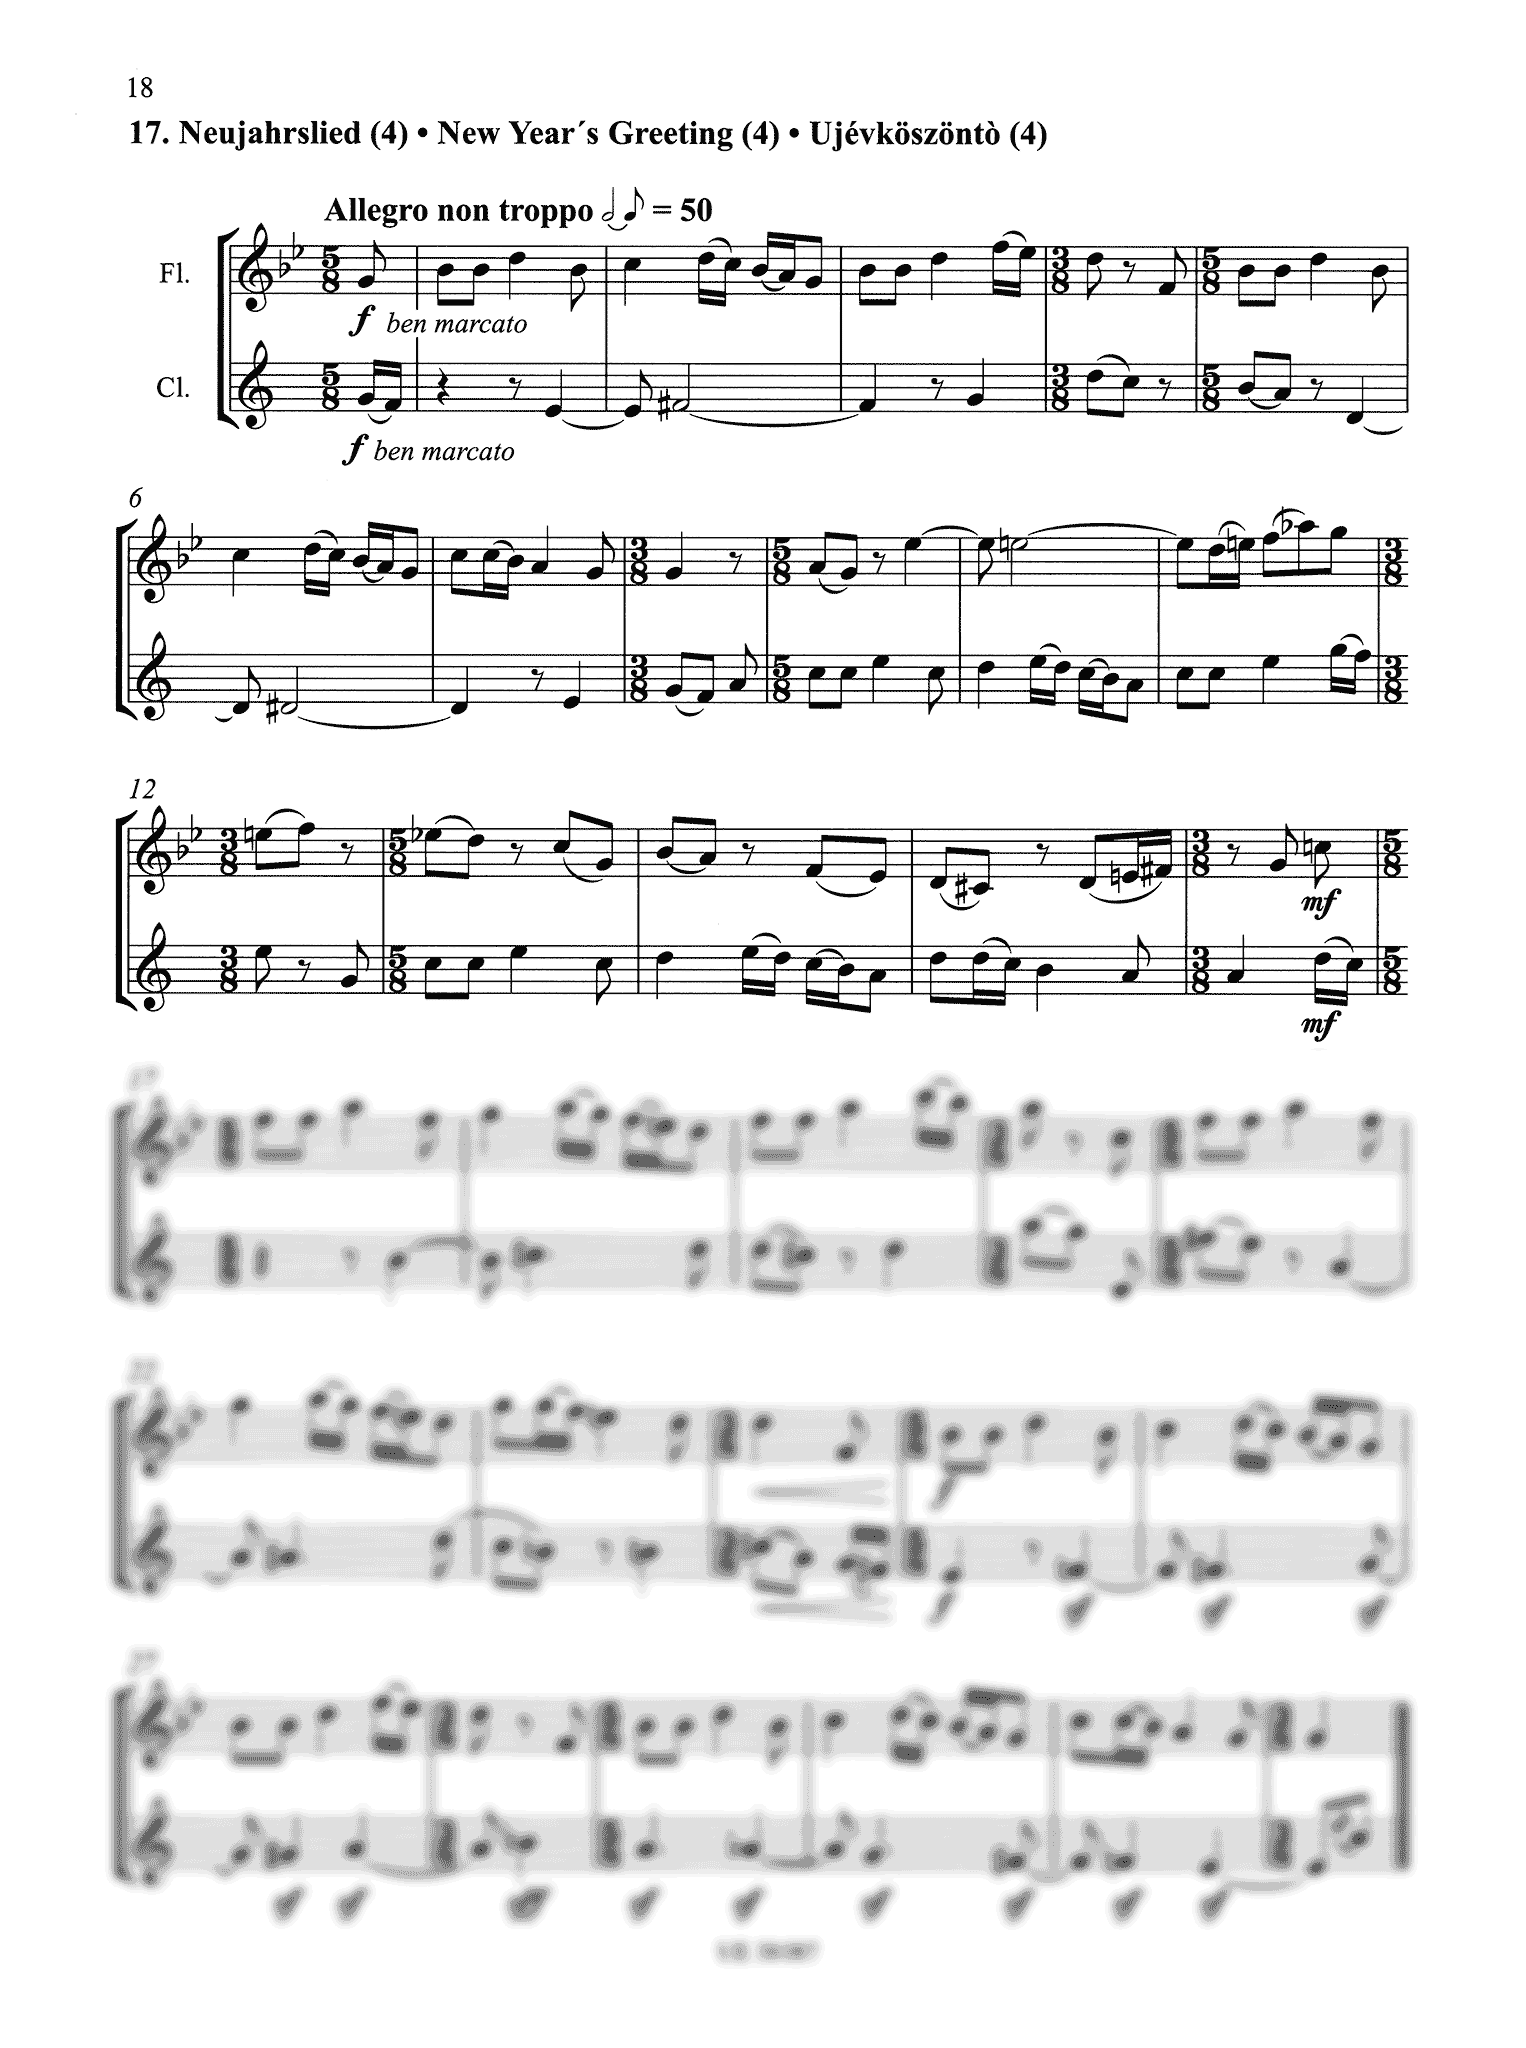 Bartók 20 Duos arranged for clarinet and flute New Year's Greeting No. 4